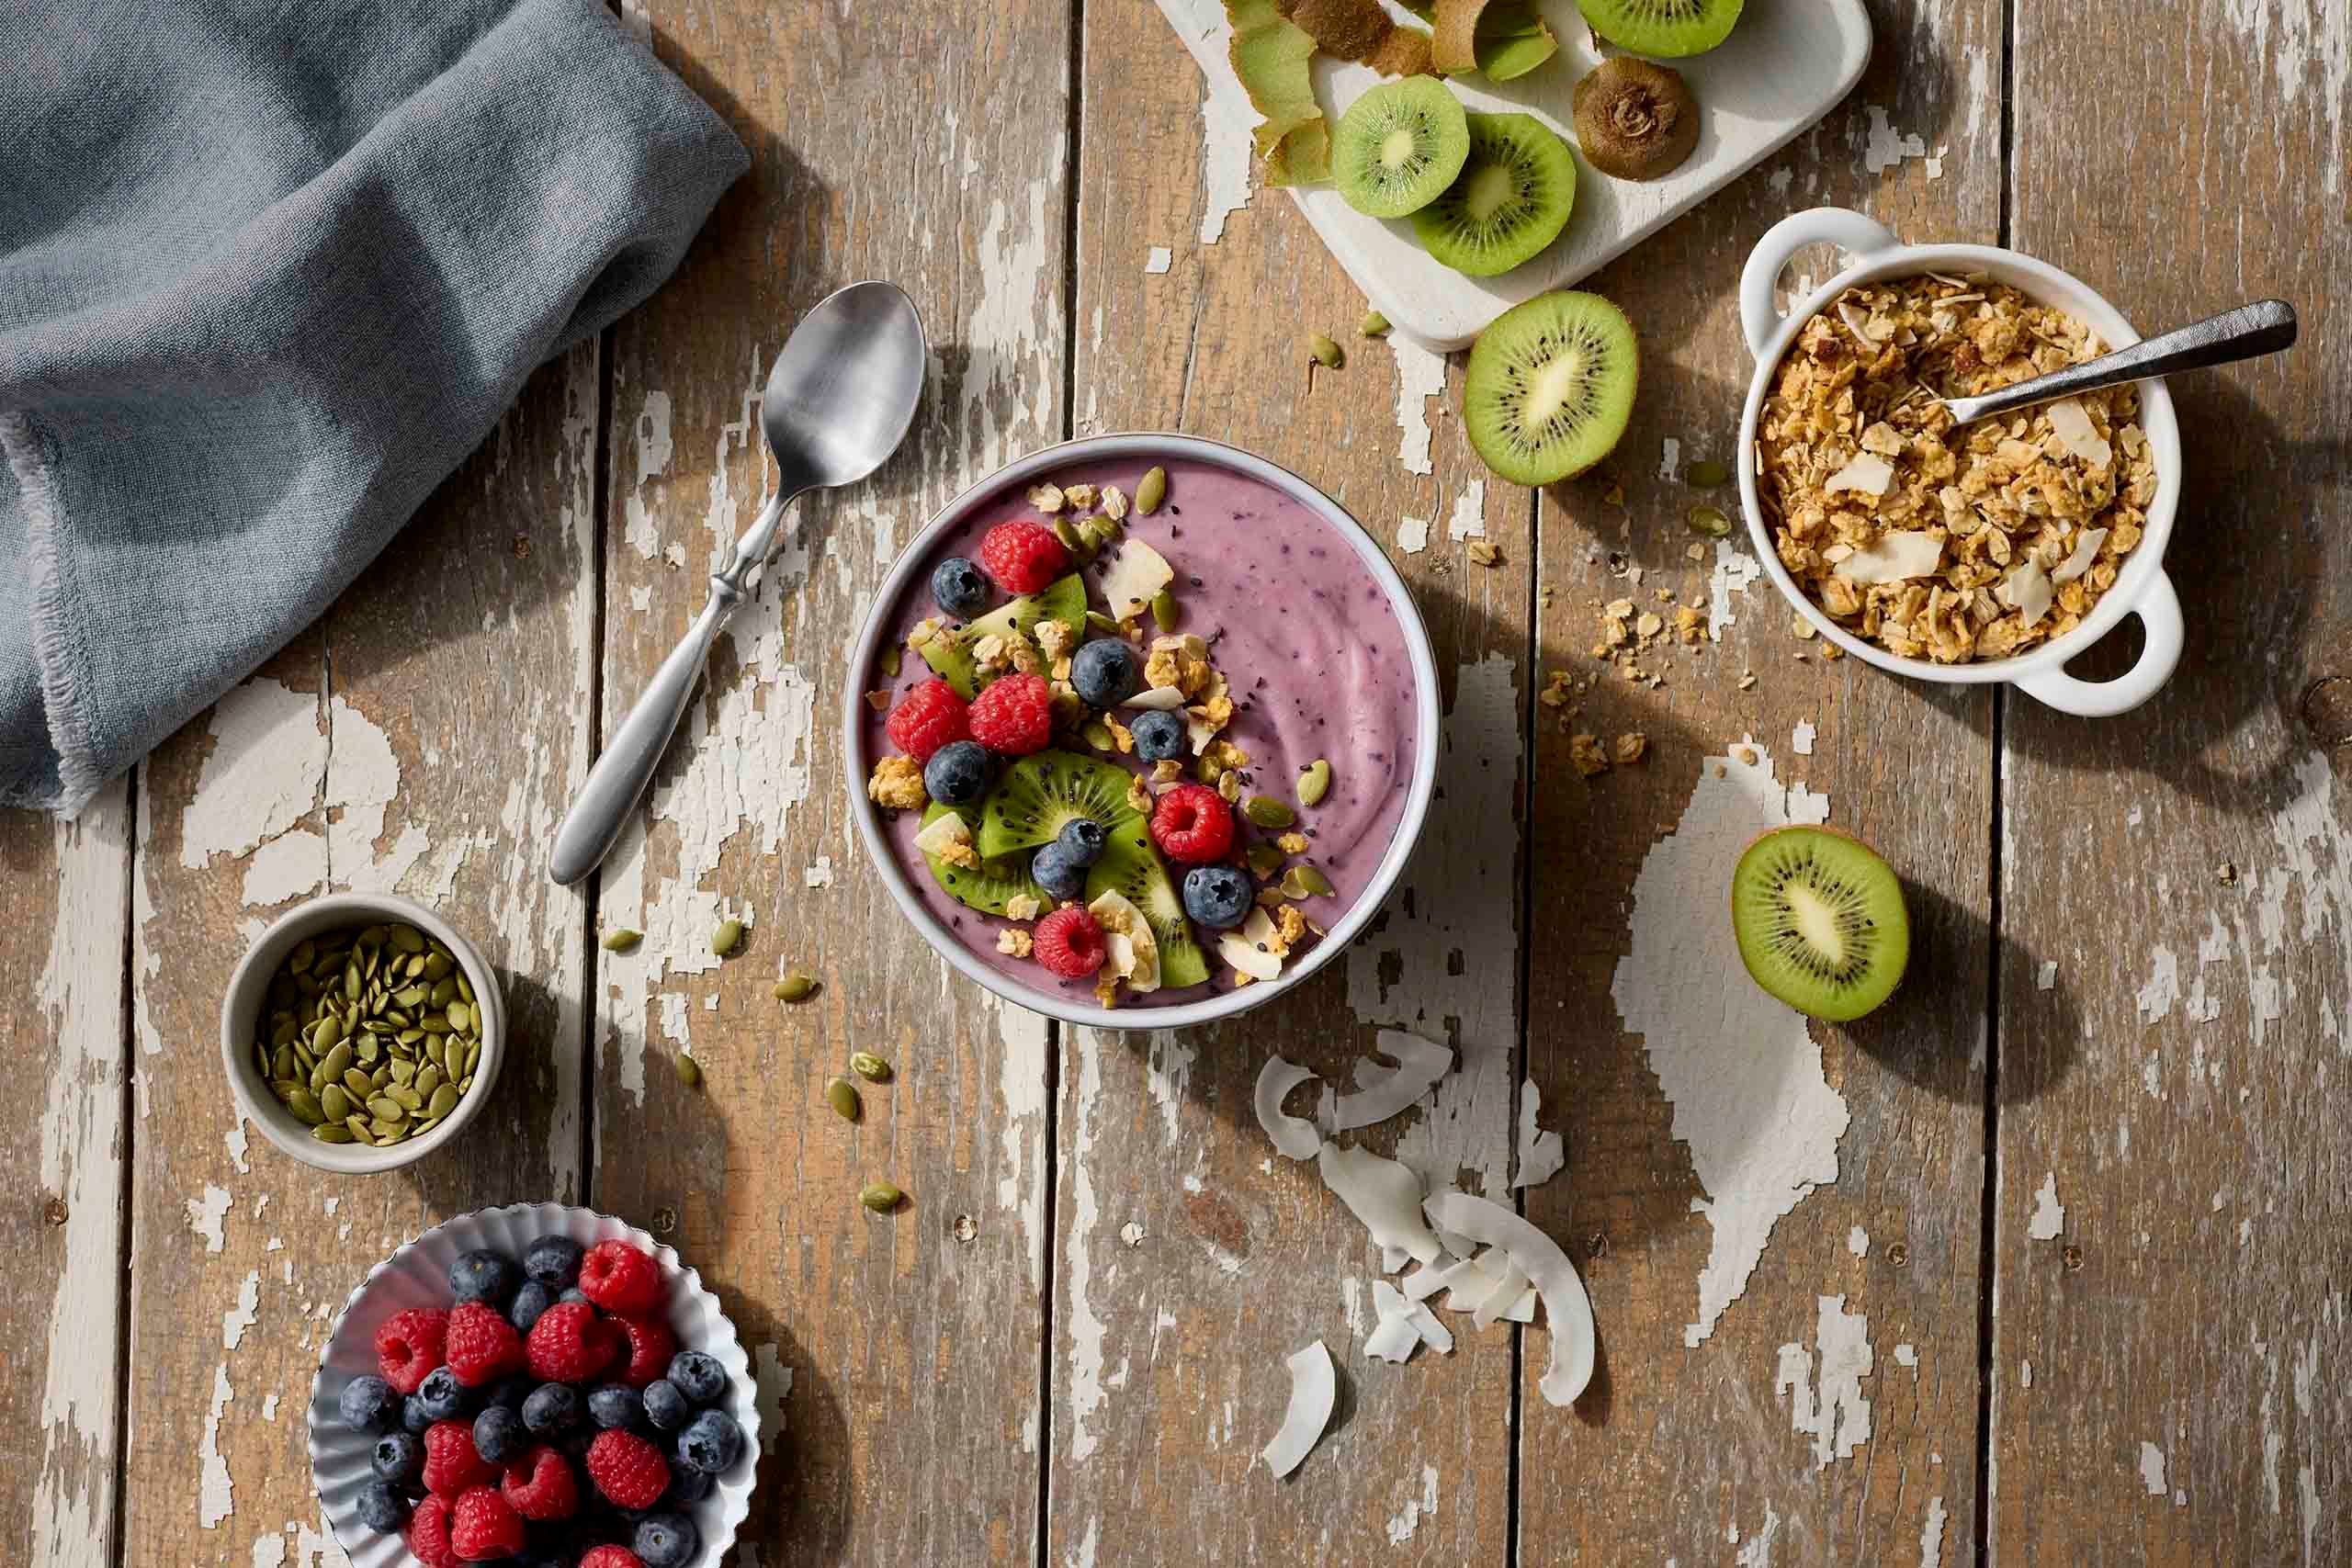 Acai Bowl Advertising By Chicago Lifestyle Food Photographer Jeff Schear